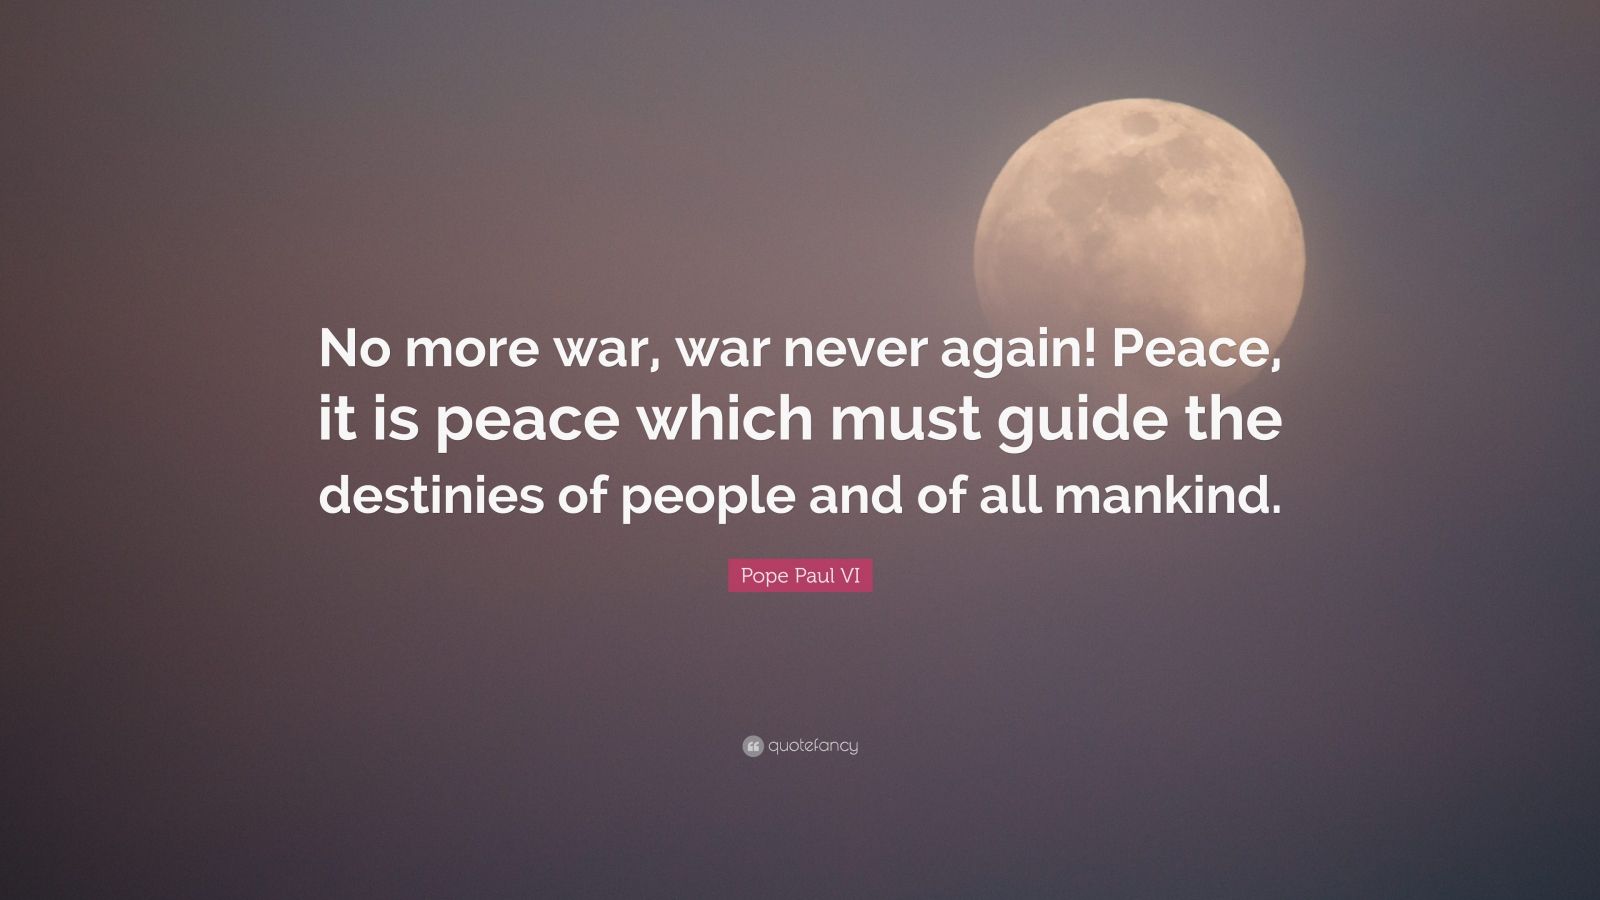 Pope Paul VI Quote: “No more war, war never again! Peace, it is peace